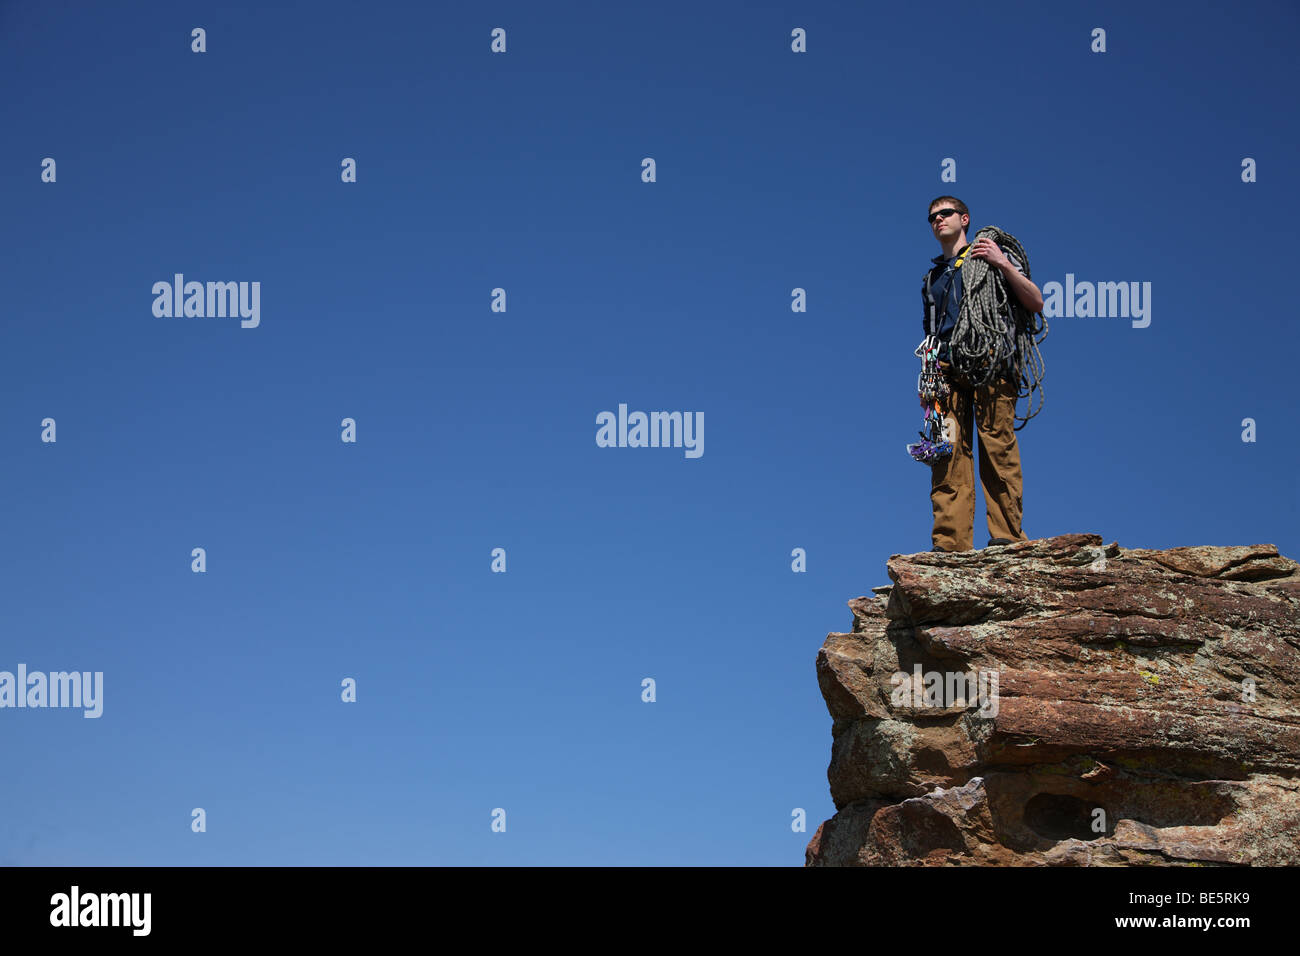 Climber stands on rocky cliff surrounded by blue sky Stock Photo